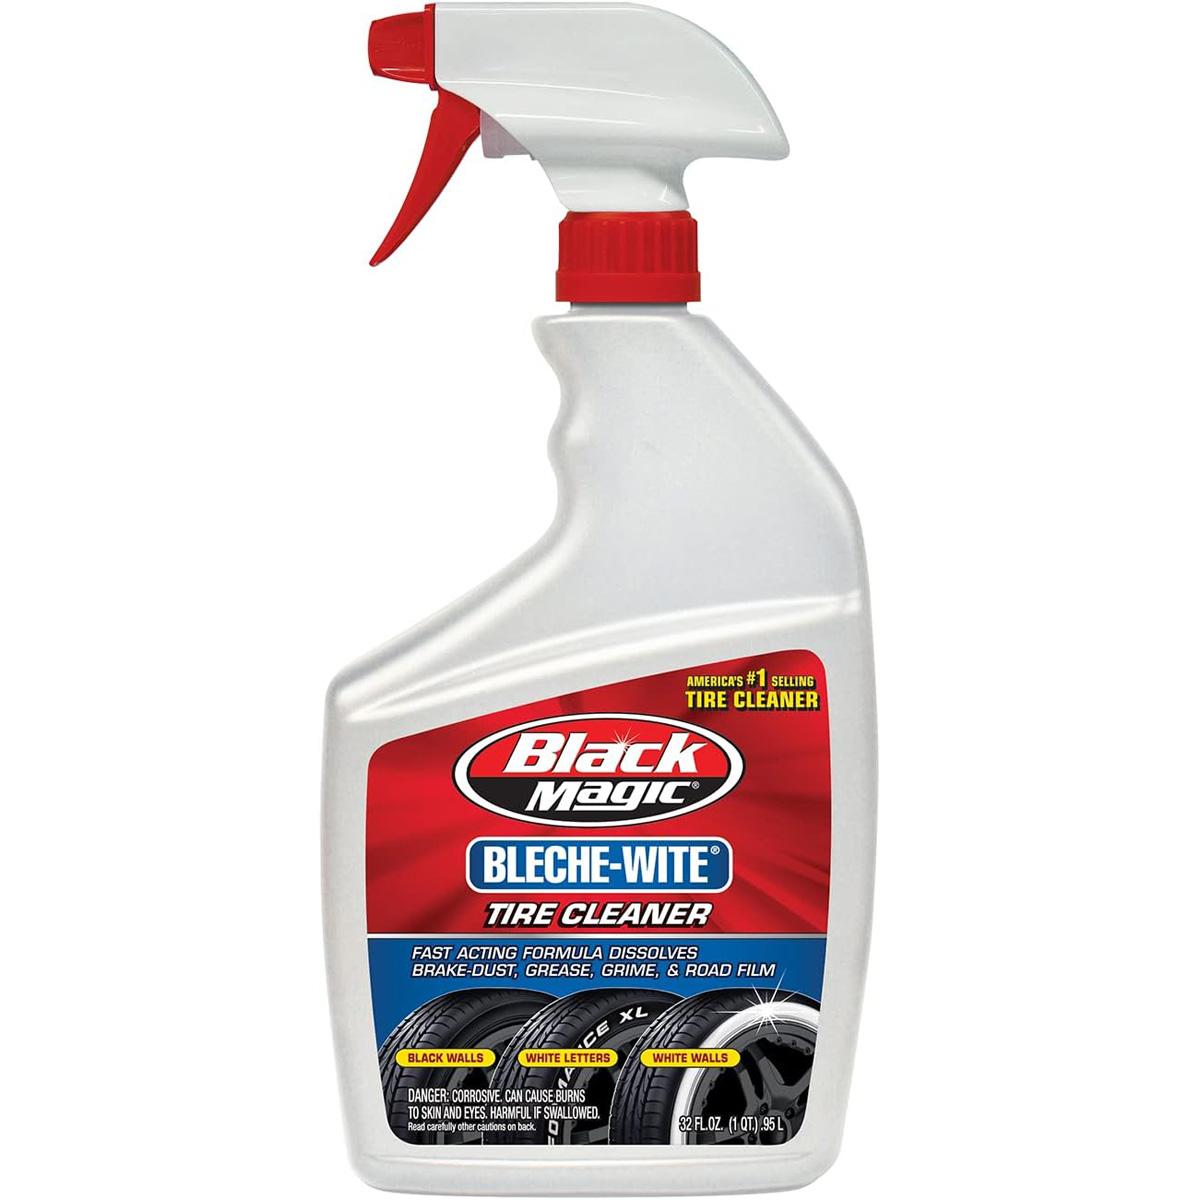 Black Magic 120066 Bleche-Wite Tire Cleaner for $2.76